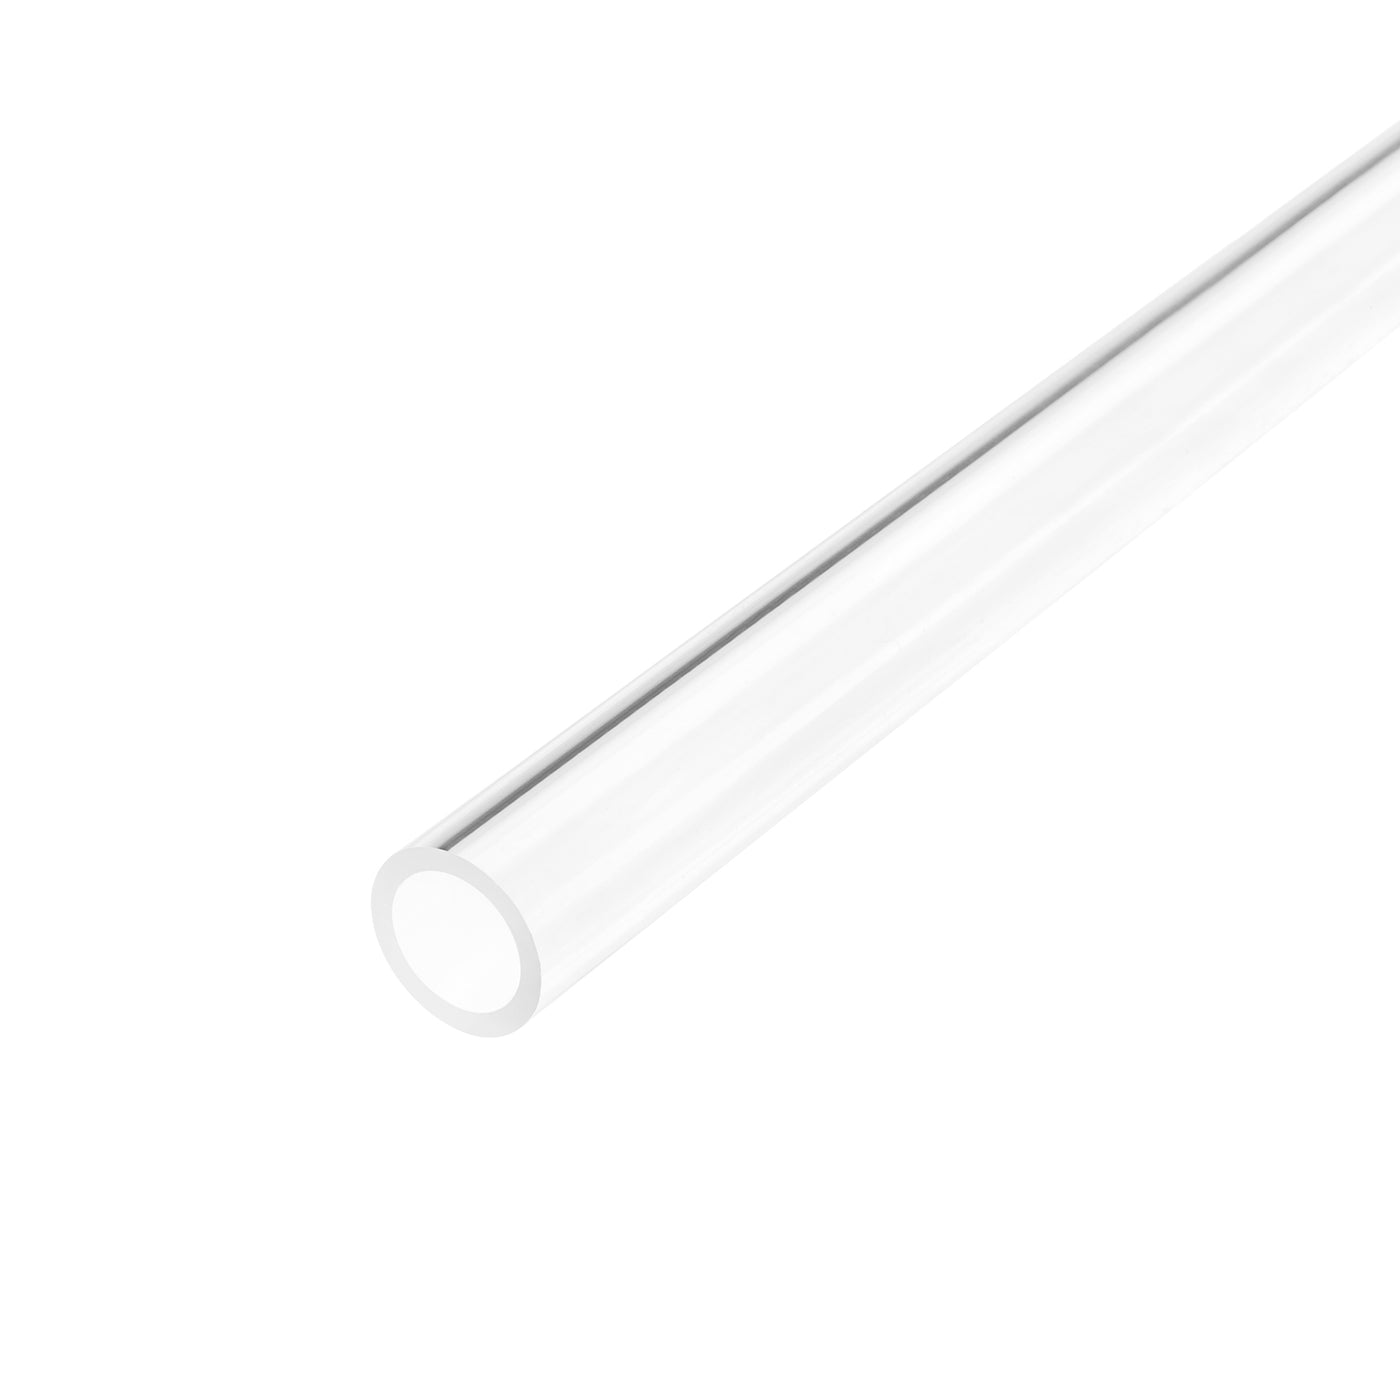 uxcell Uxcell Clear Rigid Acrylic Pipe 10mm ID x 14mm OD x 0.5m, 1.8mm Wall Round Tube